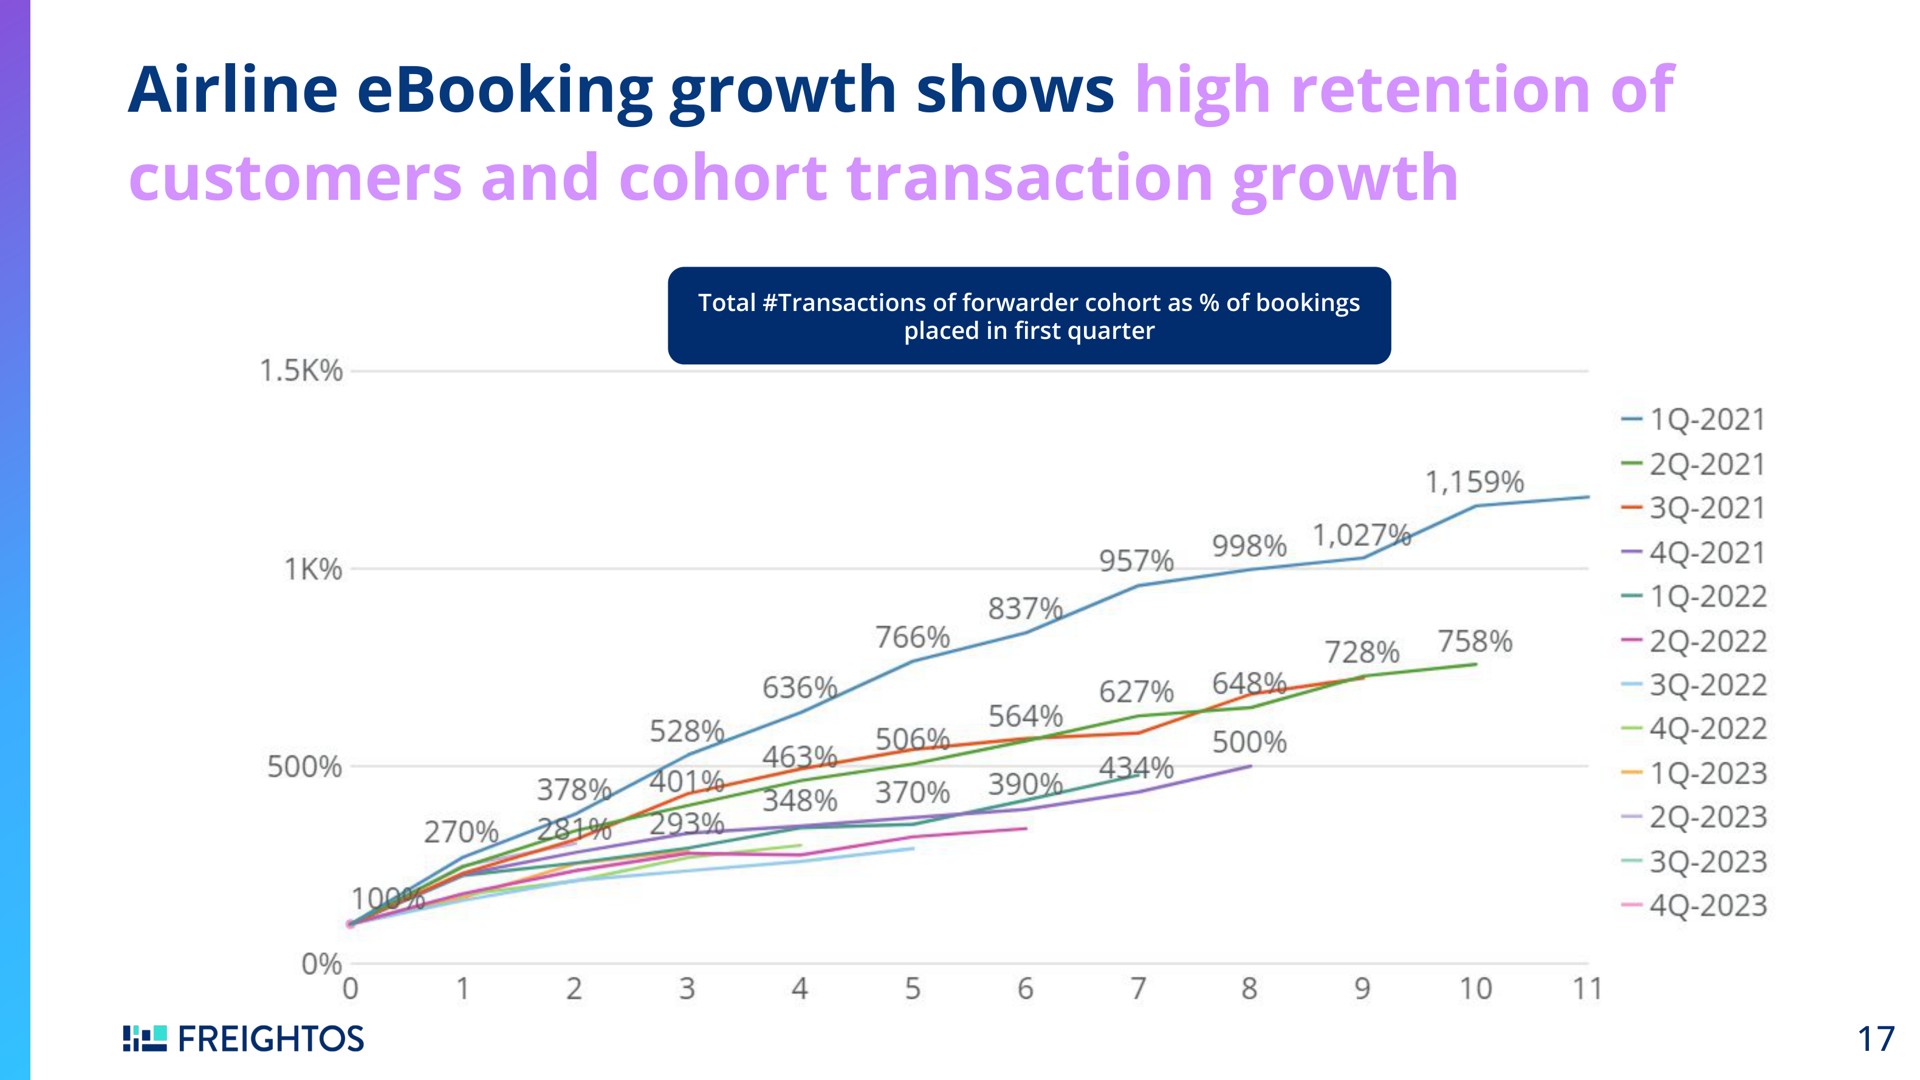 growth shows high retention of customers and cohort transaction growth a | Freightos